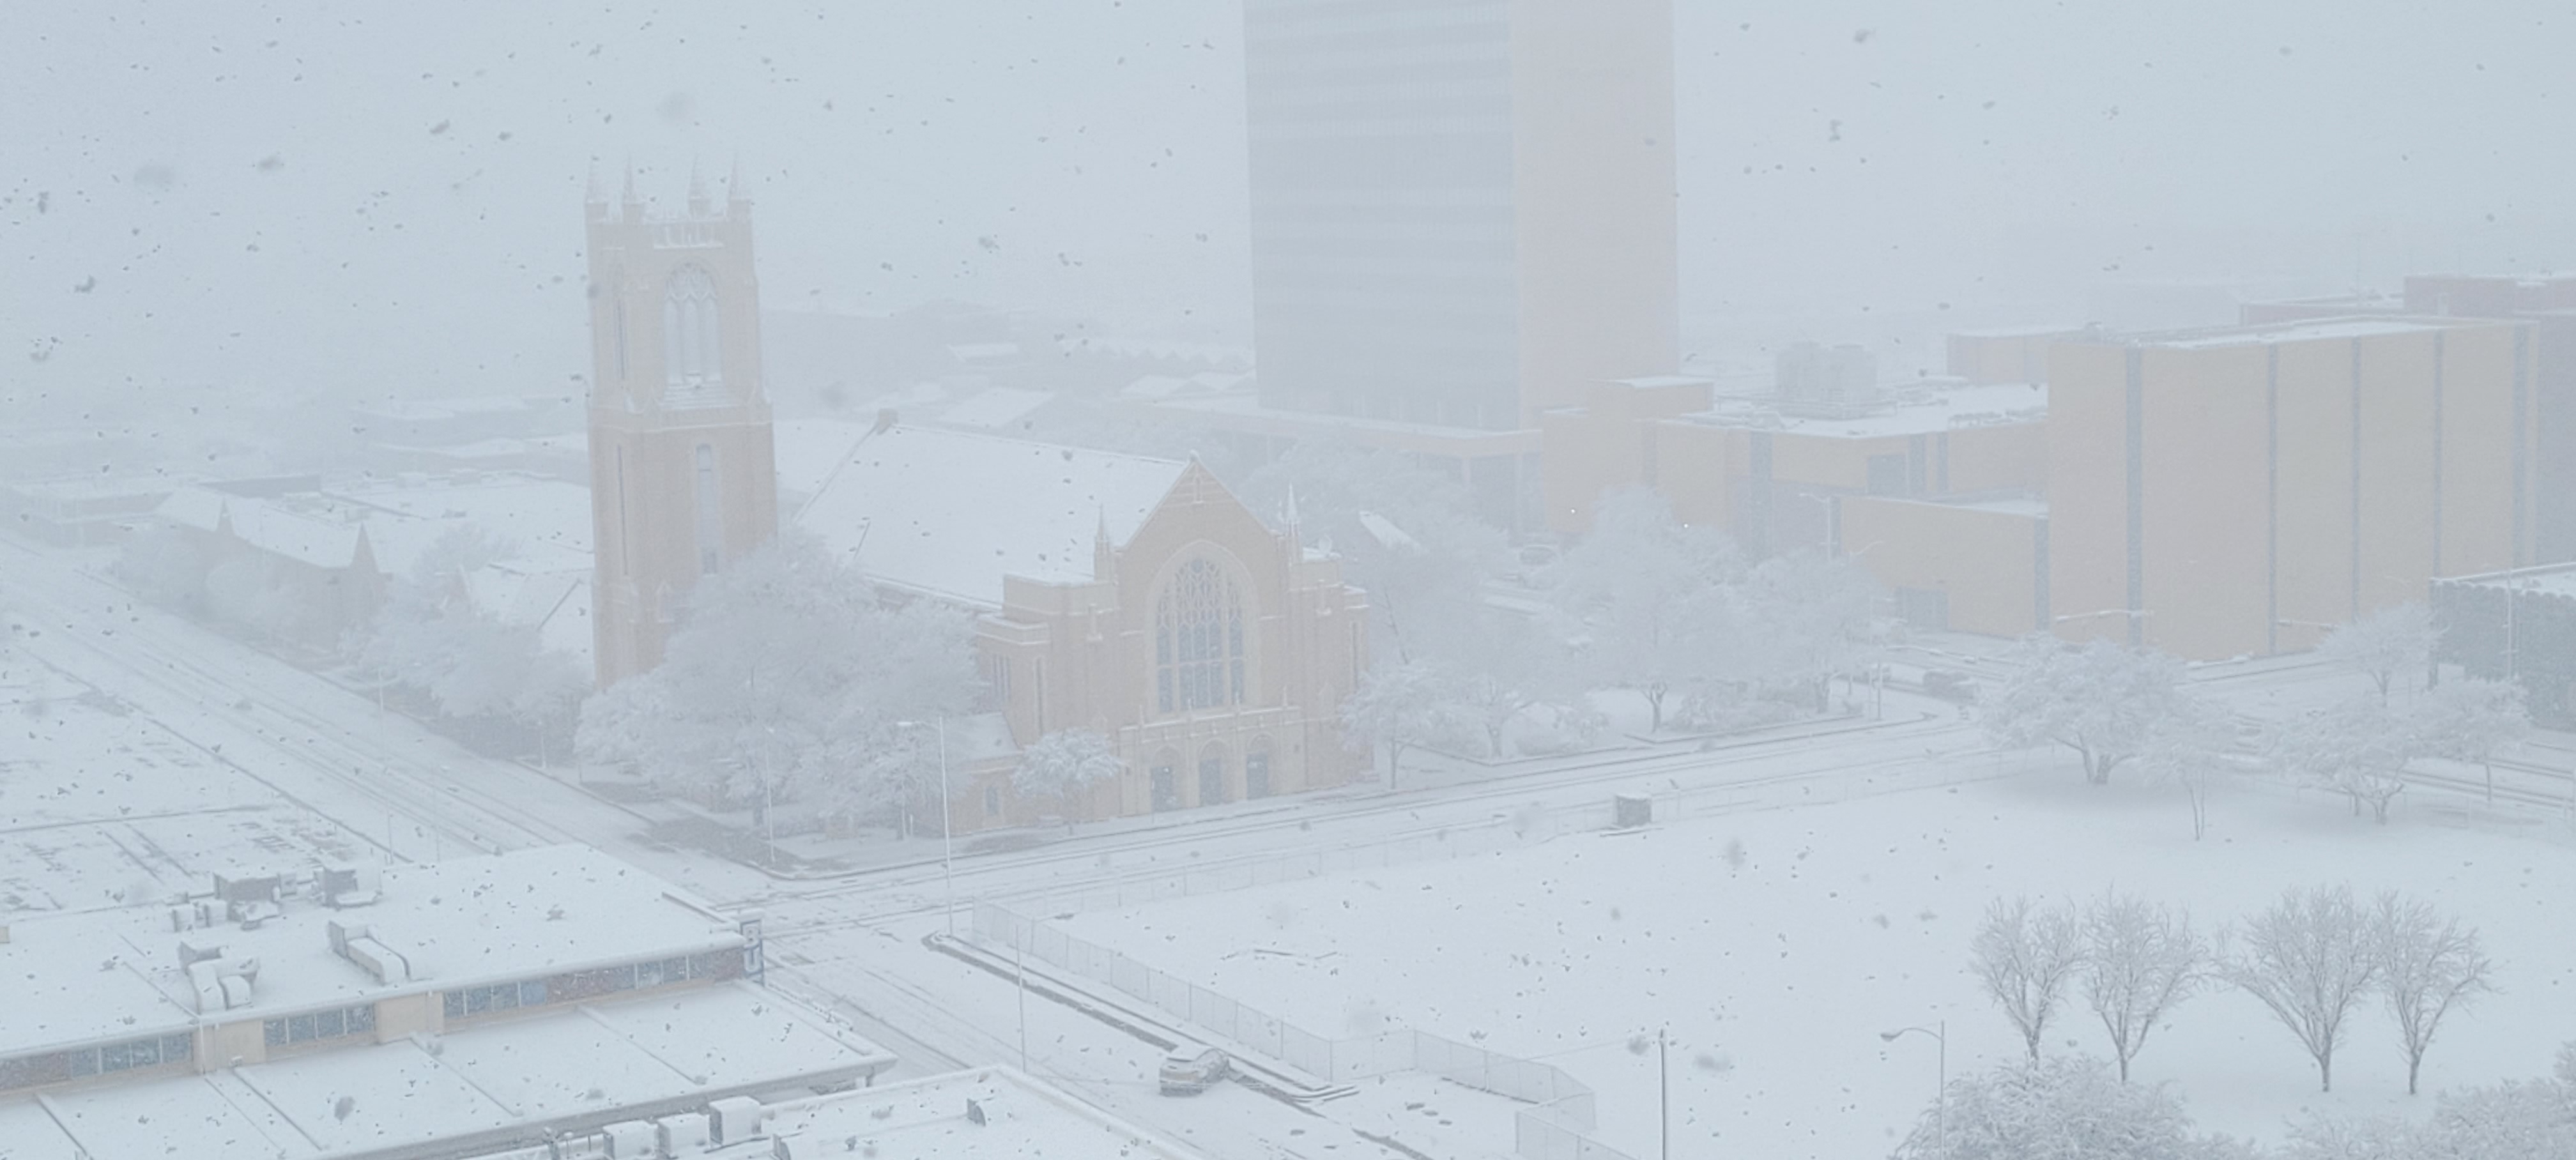 Heavy snow falling in Downtown Lubbock on Tuesday (24 January 2023). The image is courtesy of Wood Franklin.